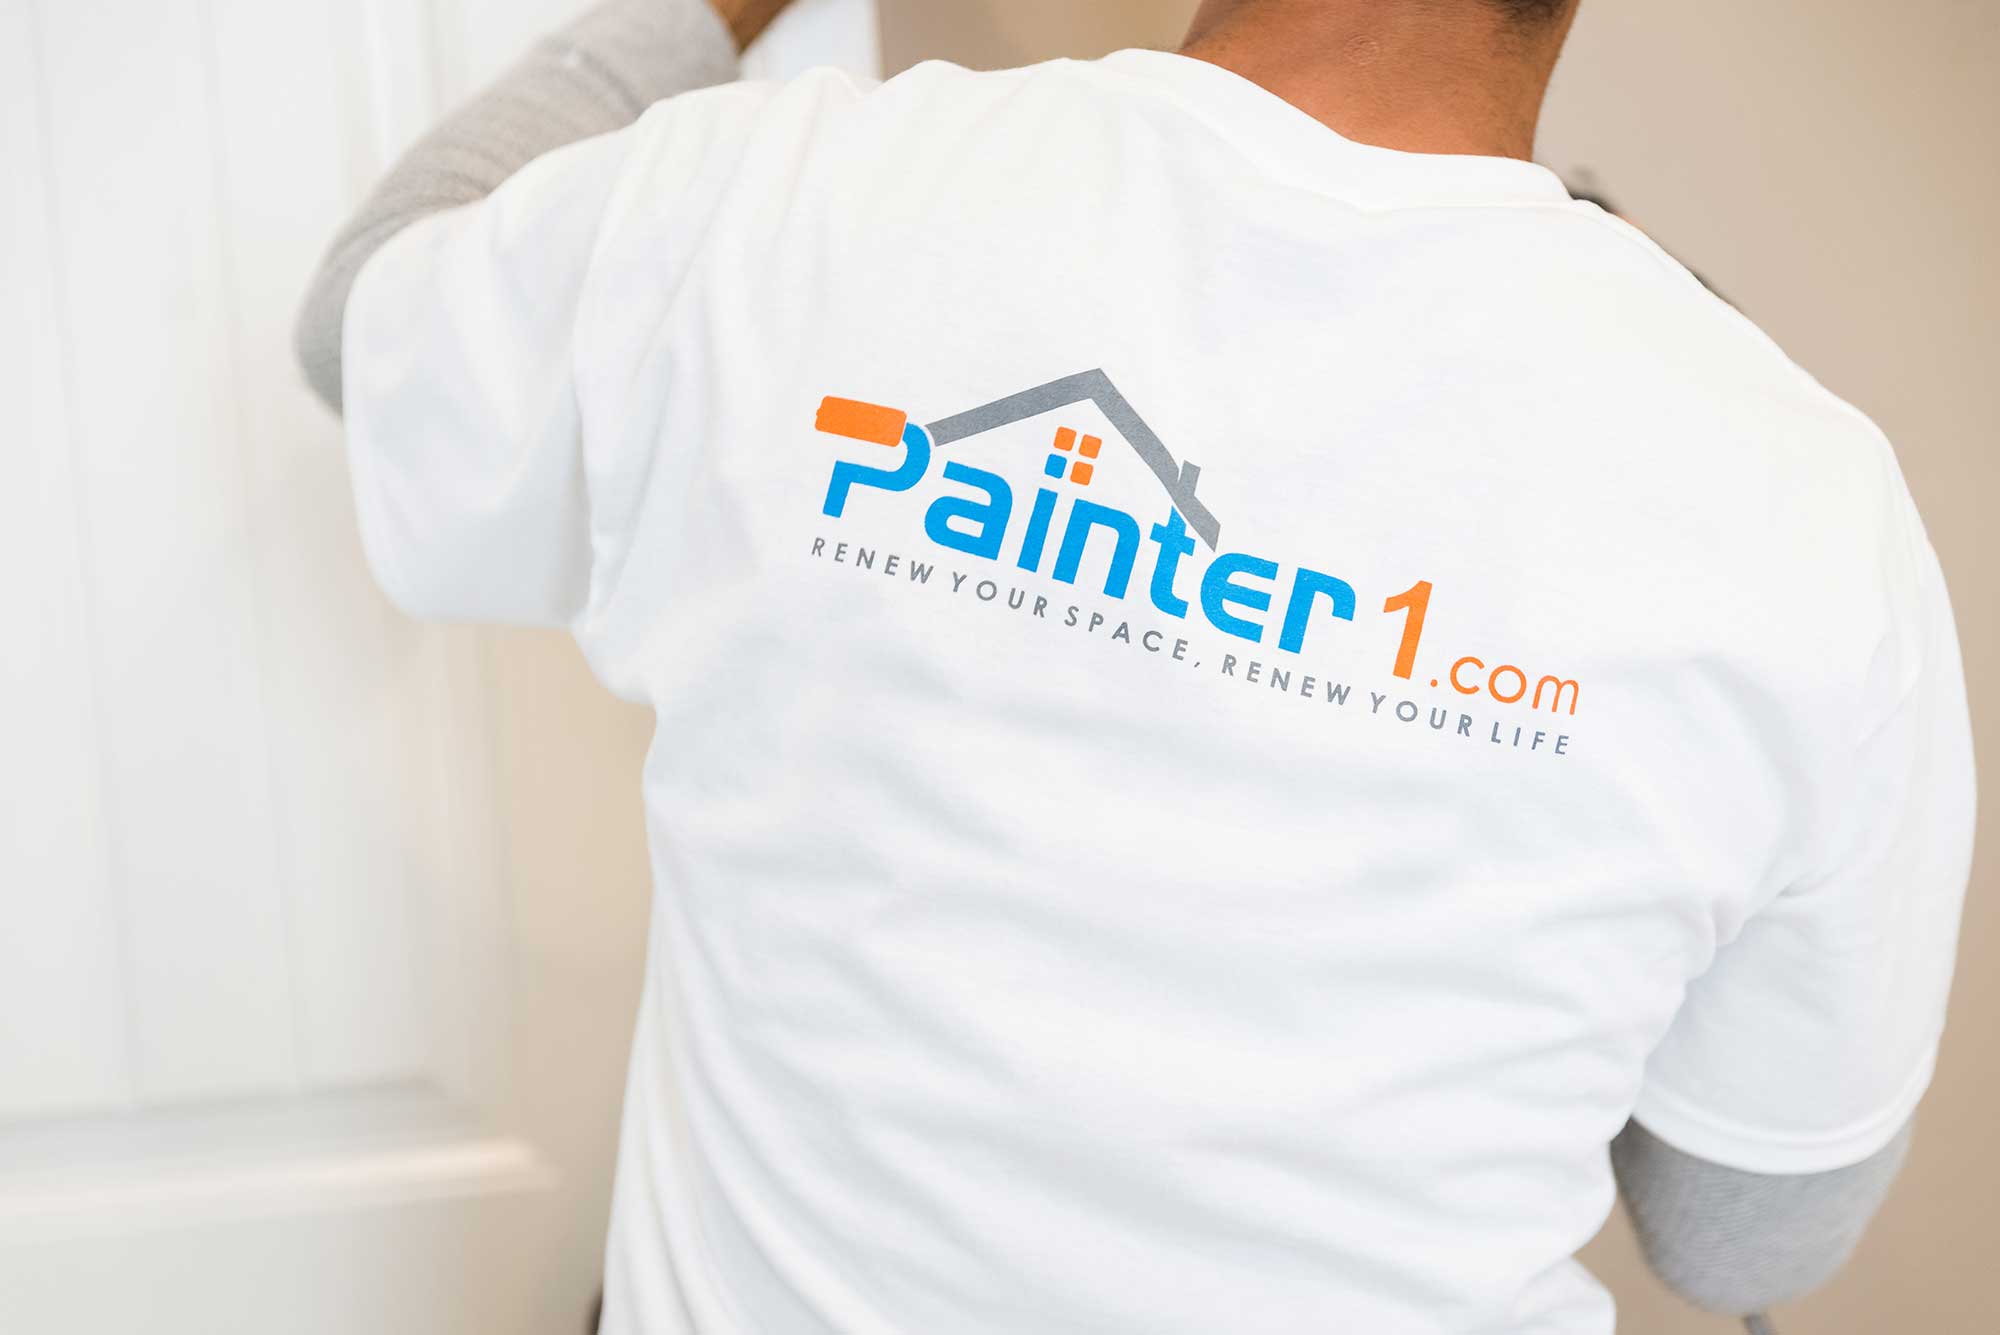 If you are searching for wallpaper removal in Atlanta, Painter1 offers professional wallpaper removal in Atlanta.